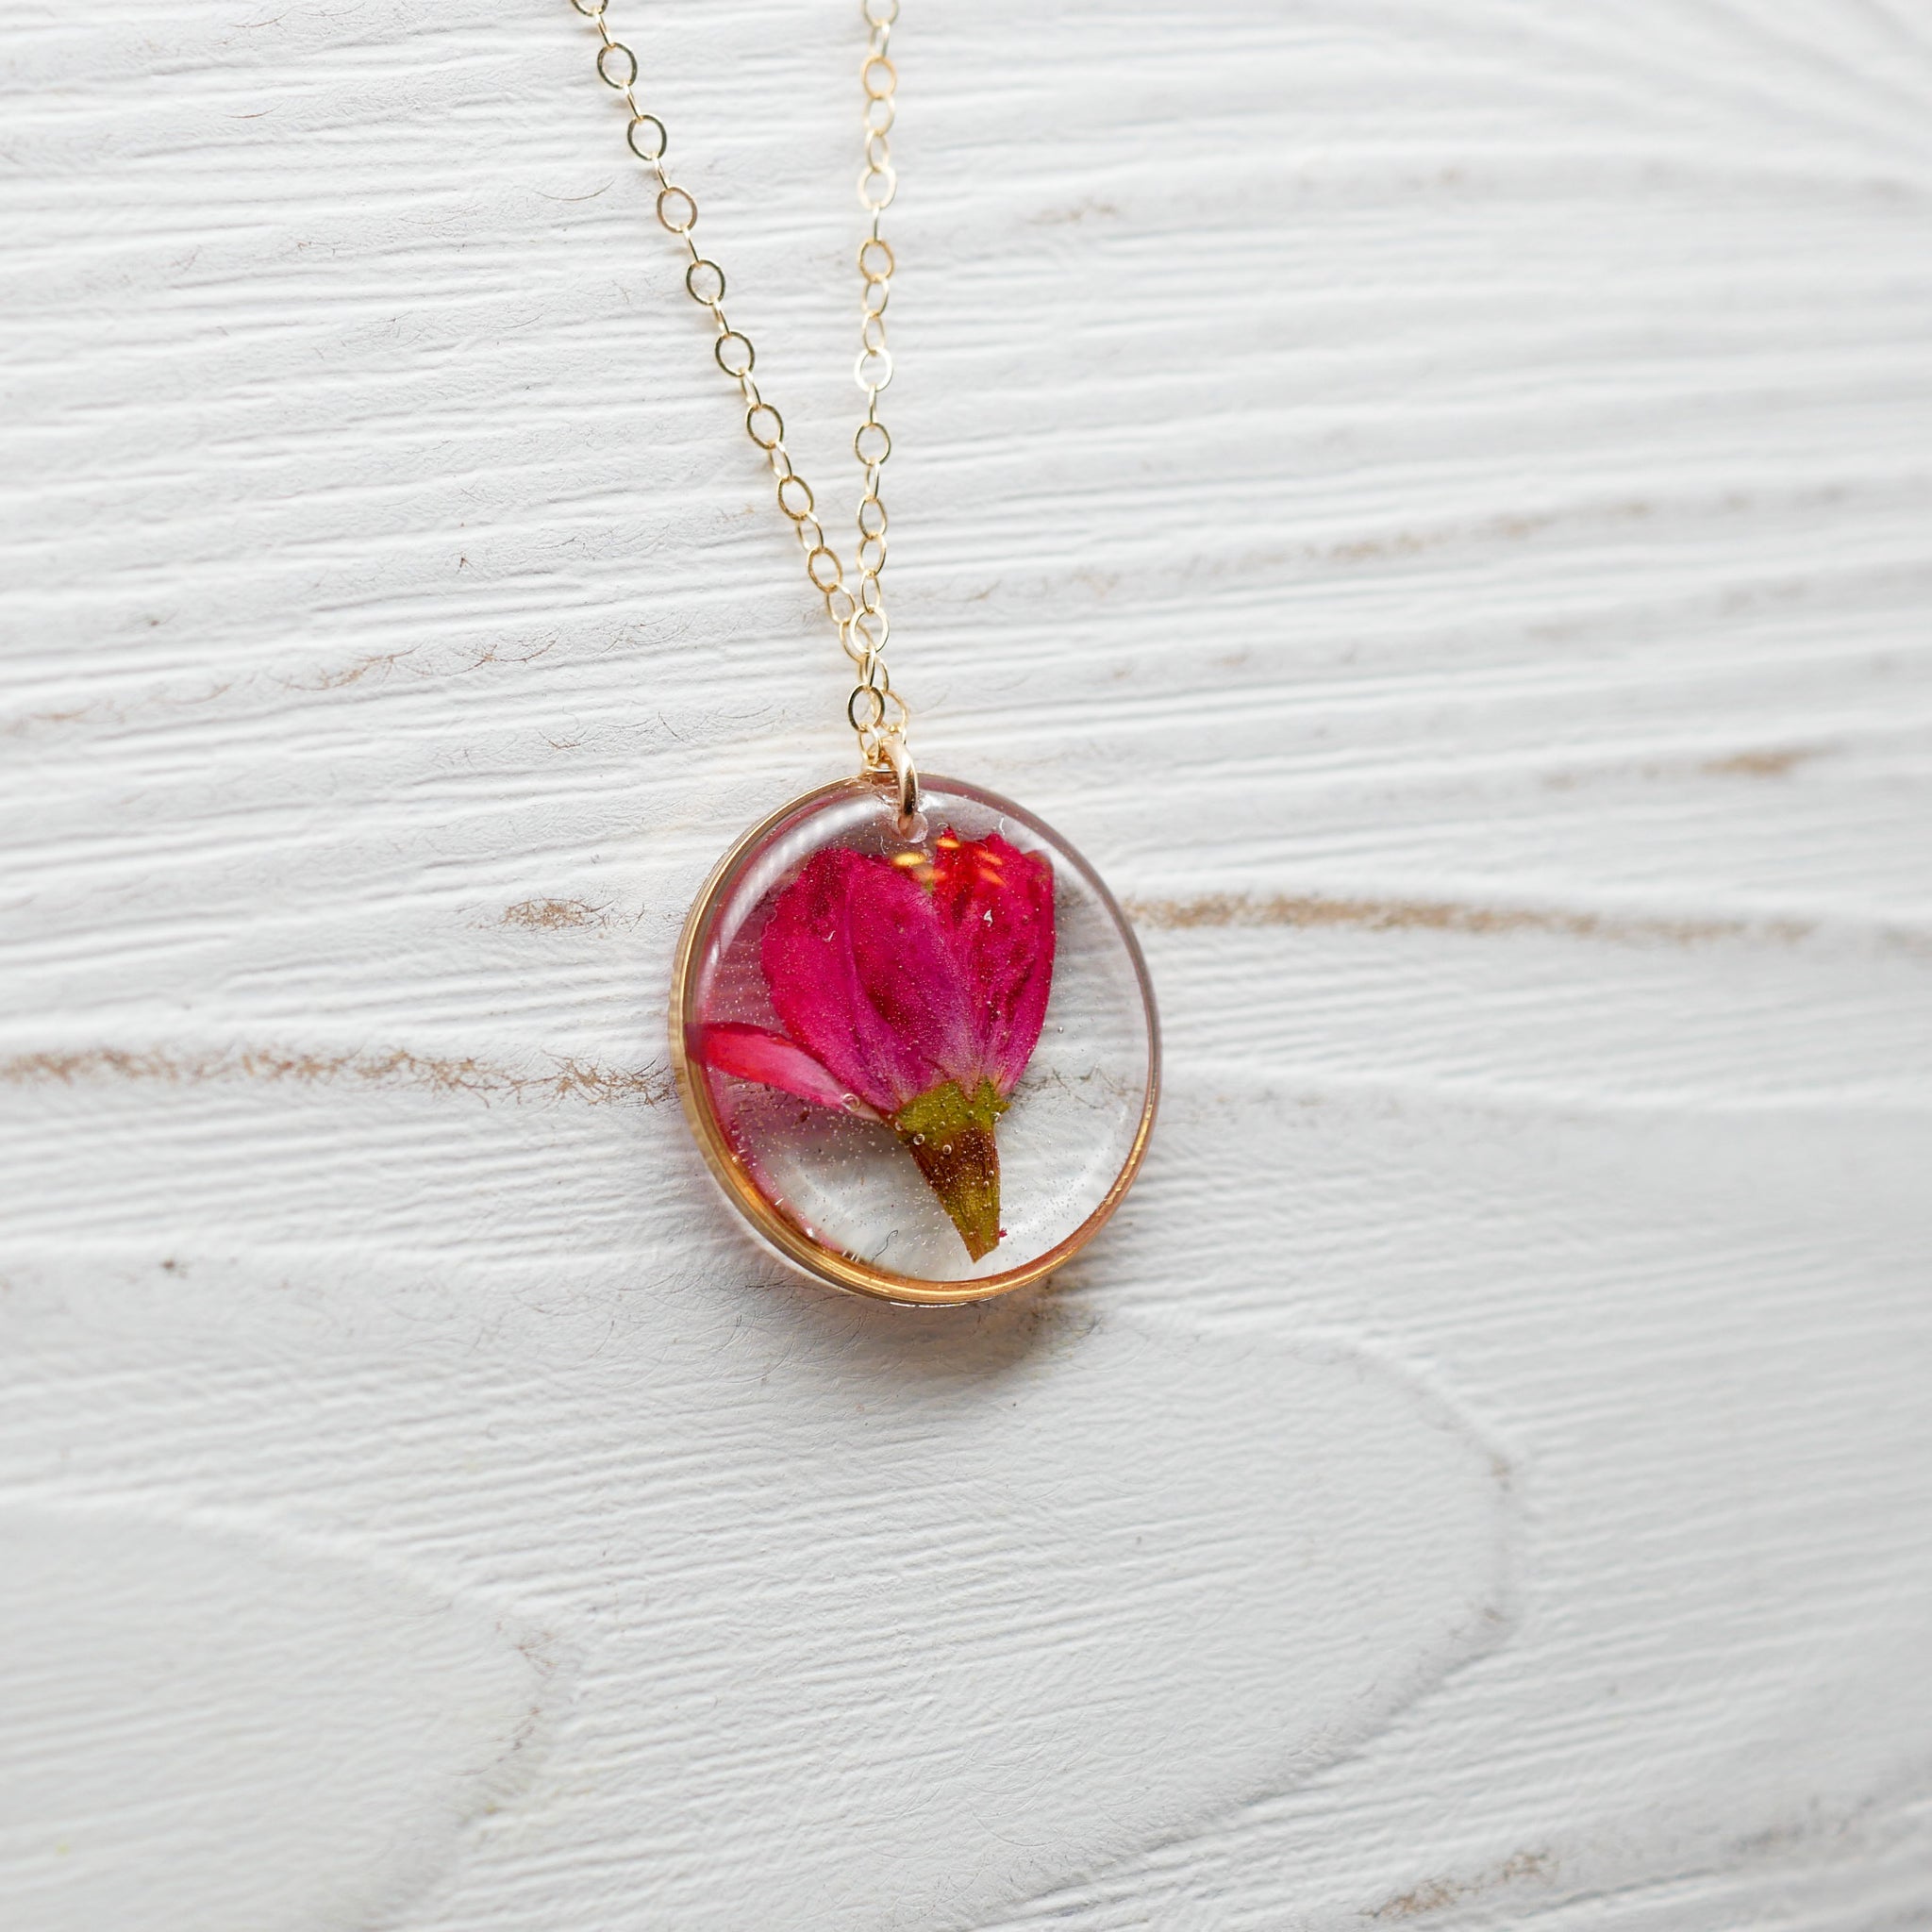 Dainty Rose Charm Necklace